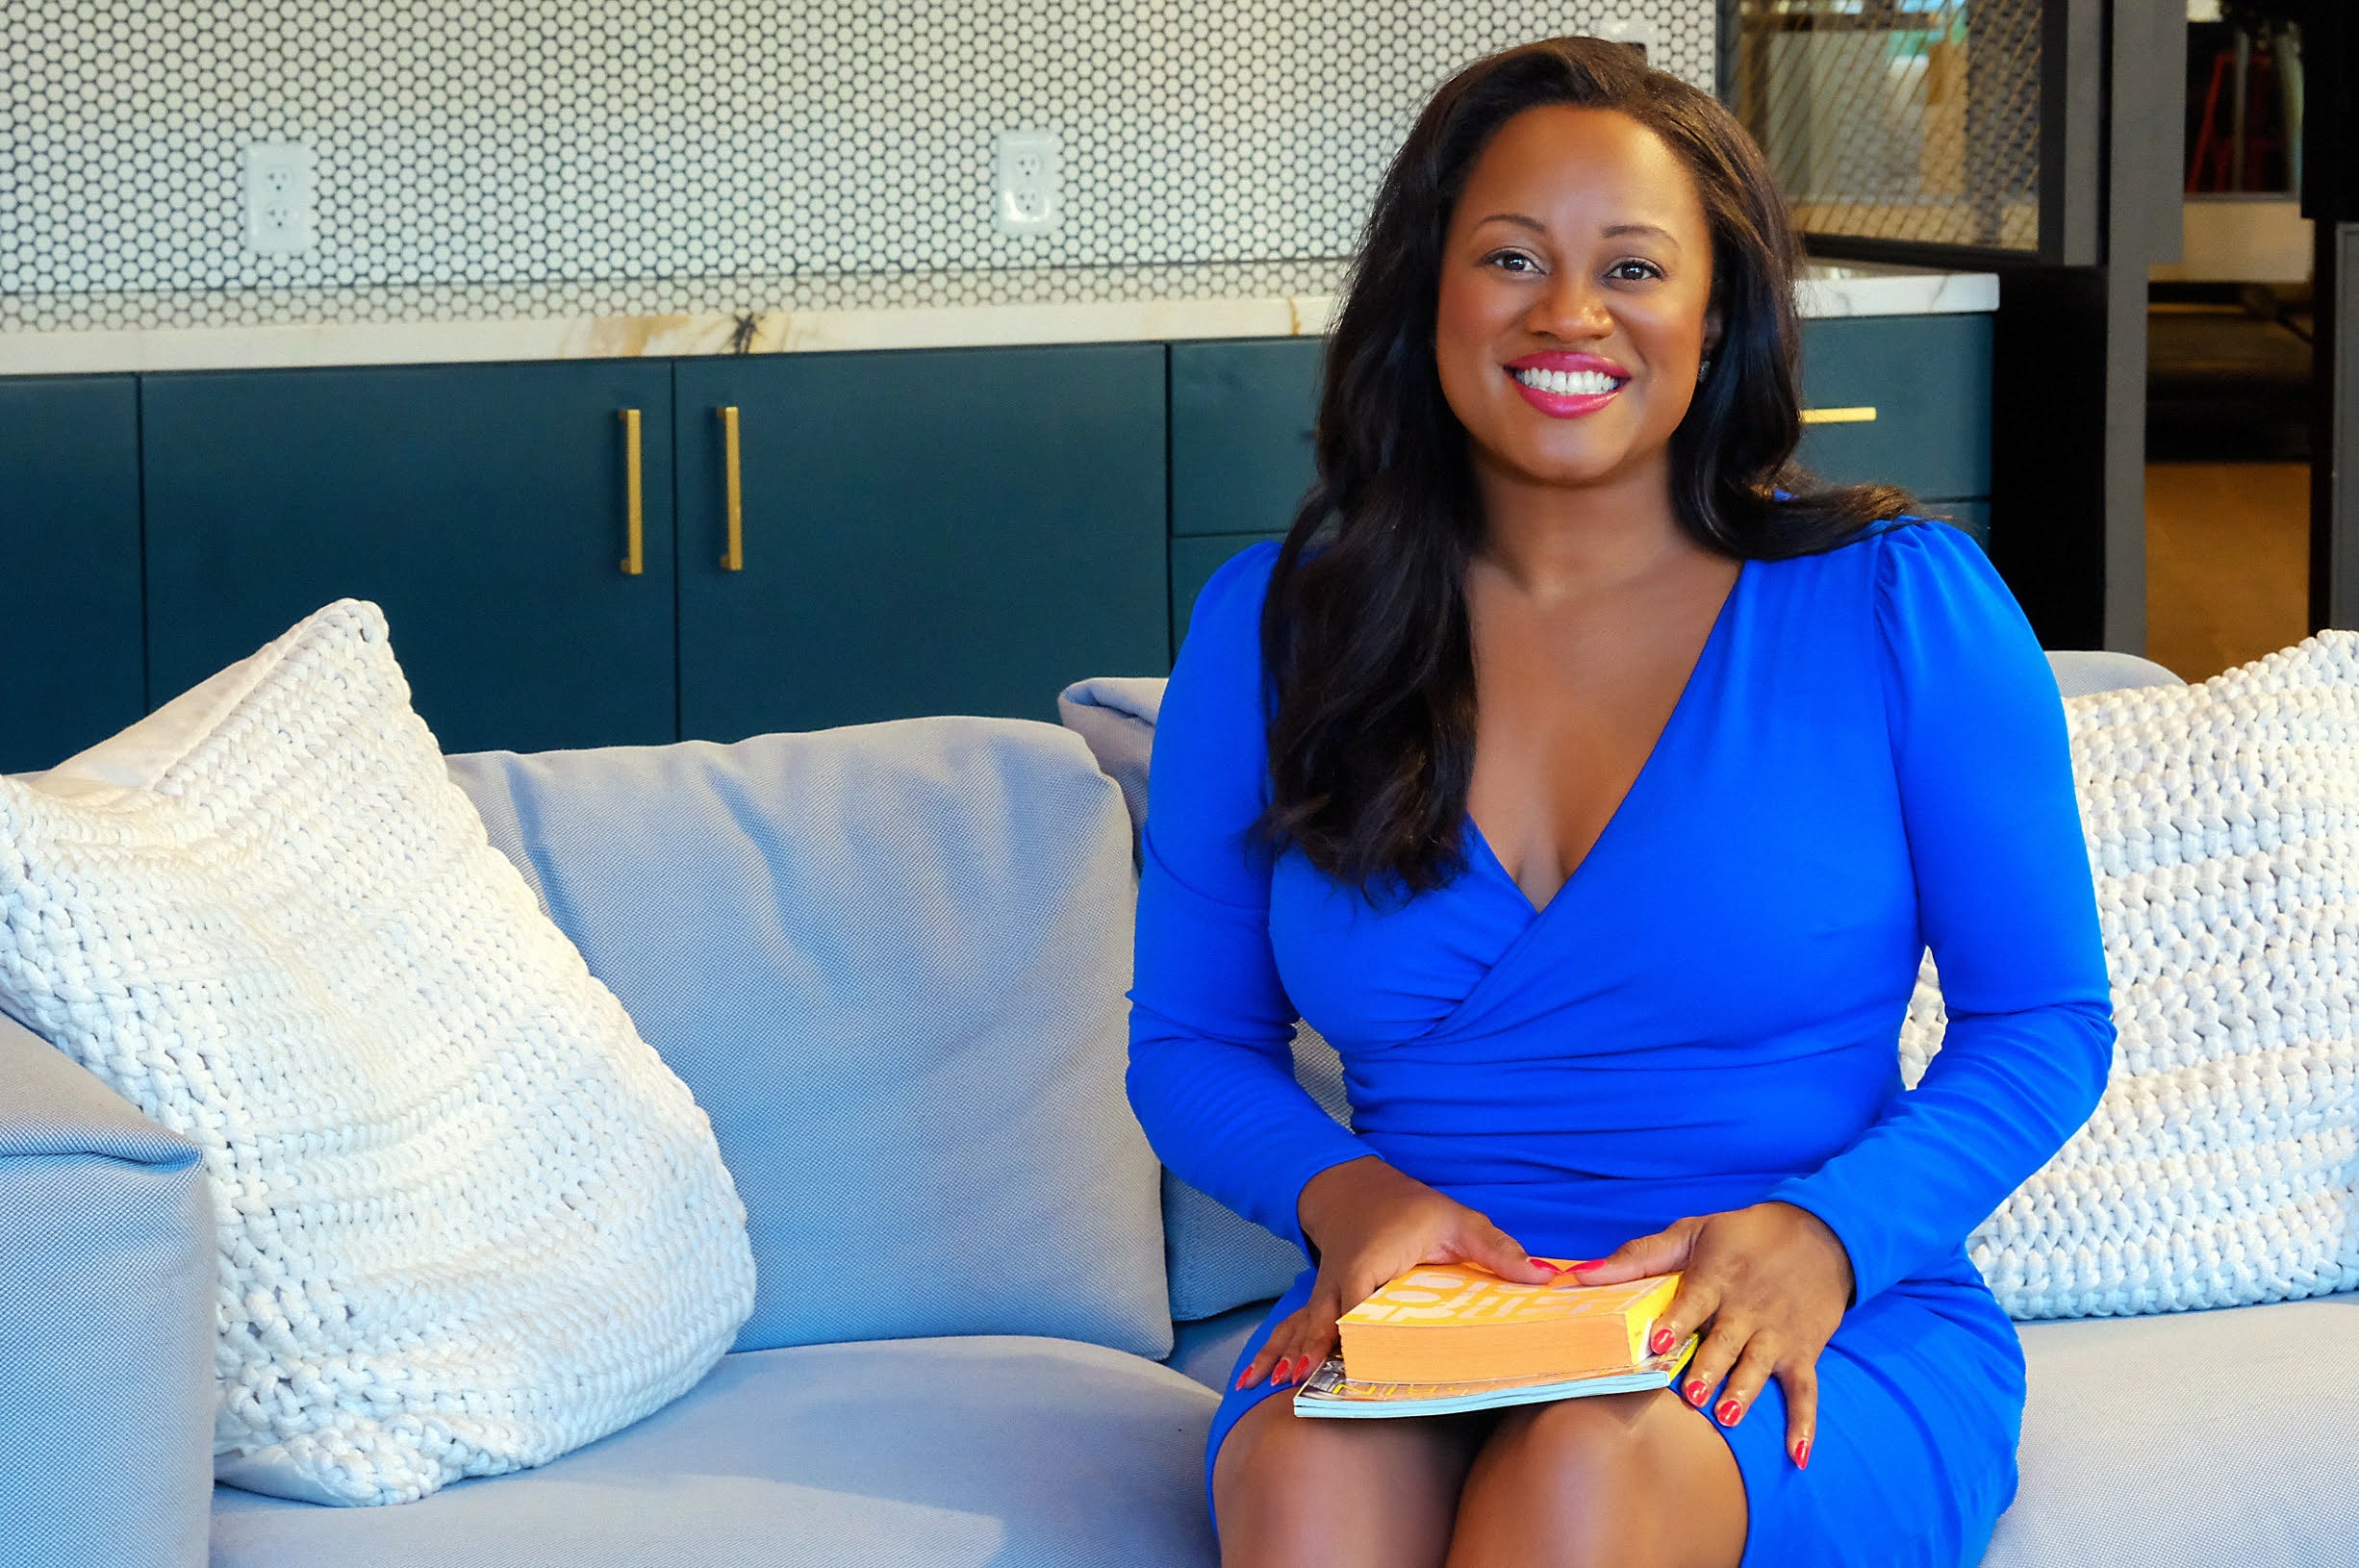 Adonica Shaw of Wingwomen: 5 Things You Need To Heal After a